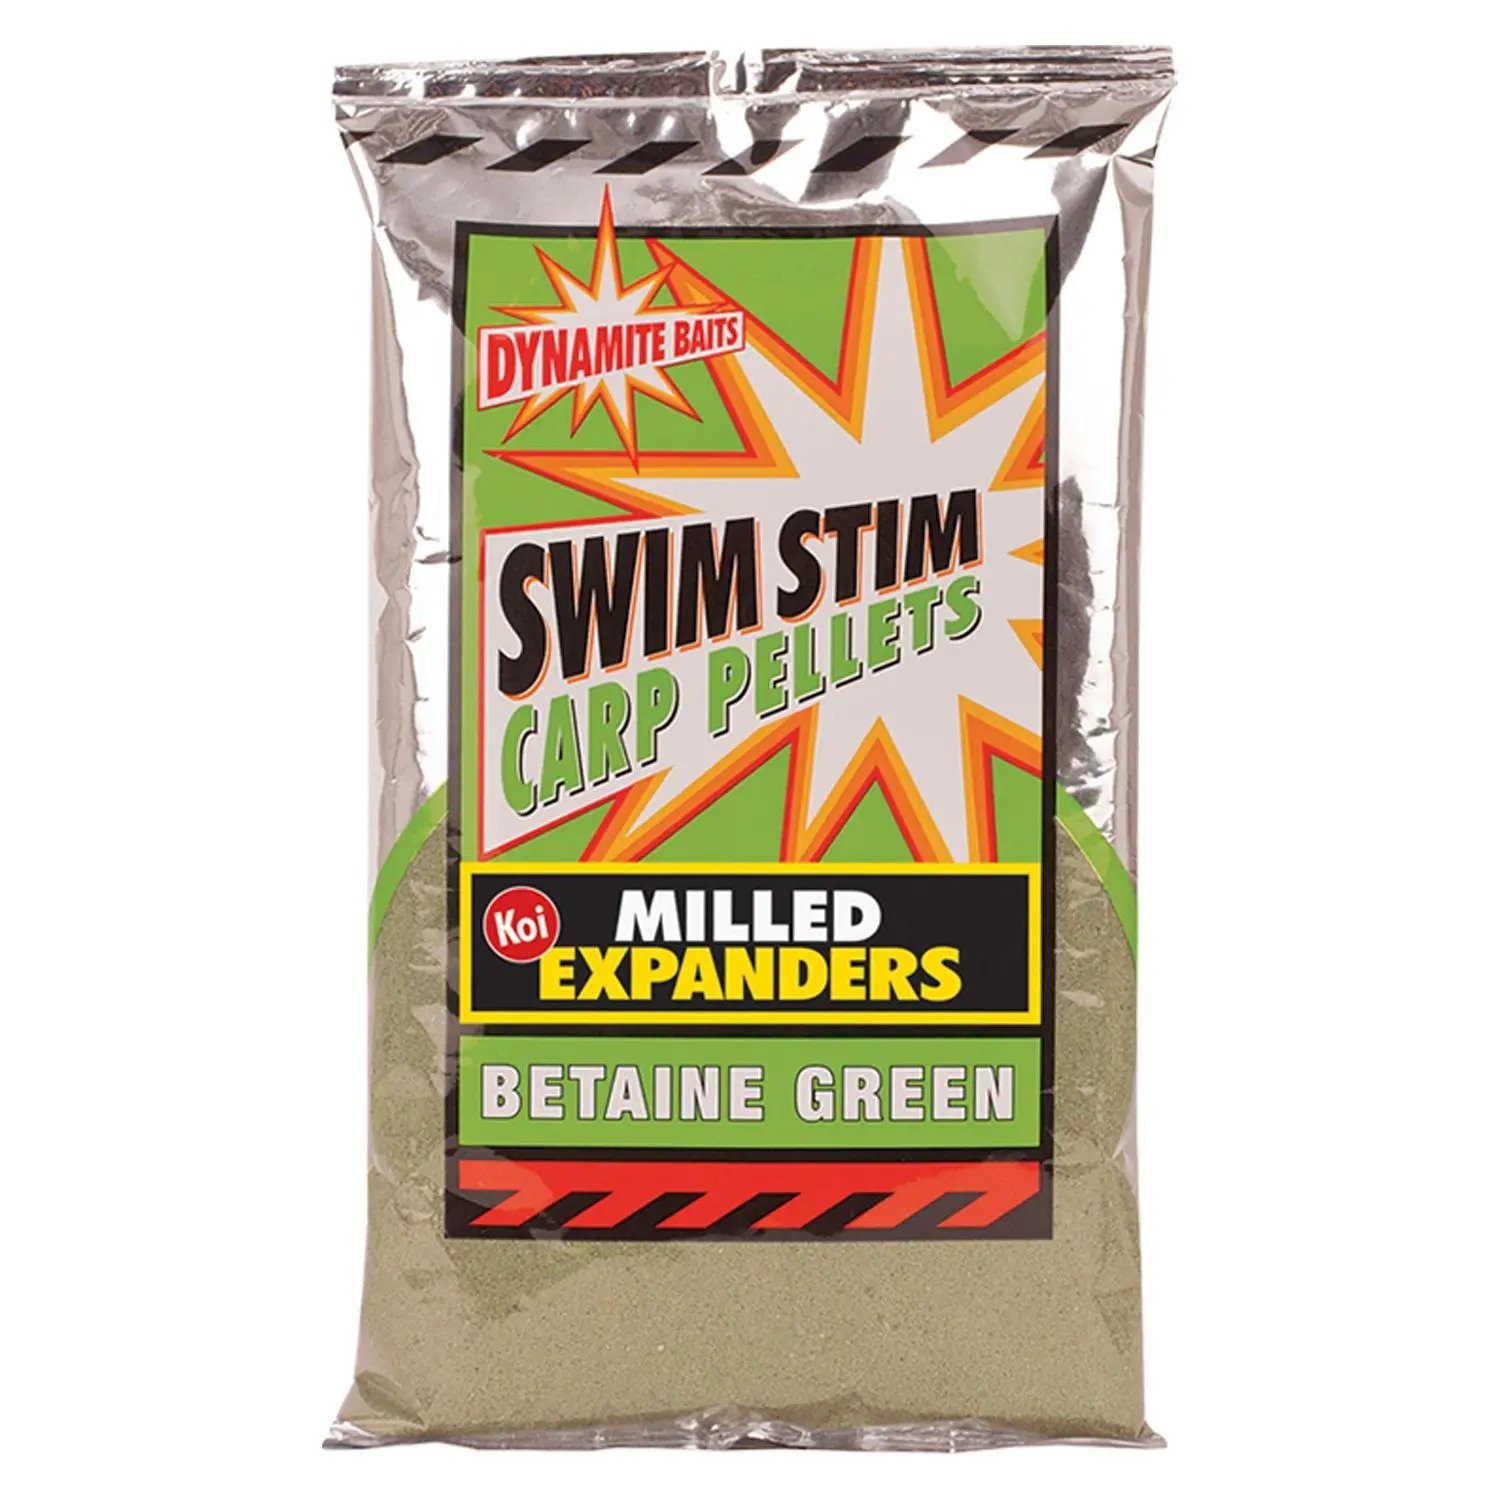 DYNAMITE BAITS MILLED EXPANDERS BETAINE GREEN 750GR